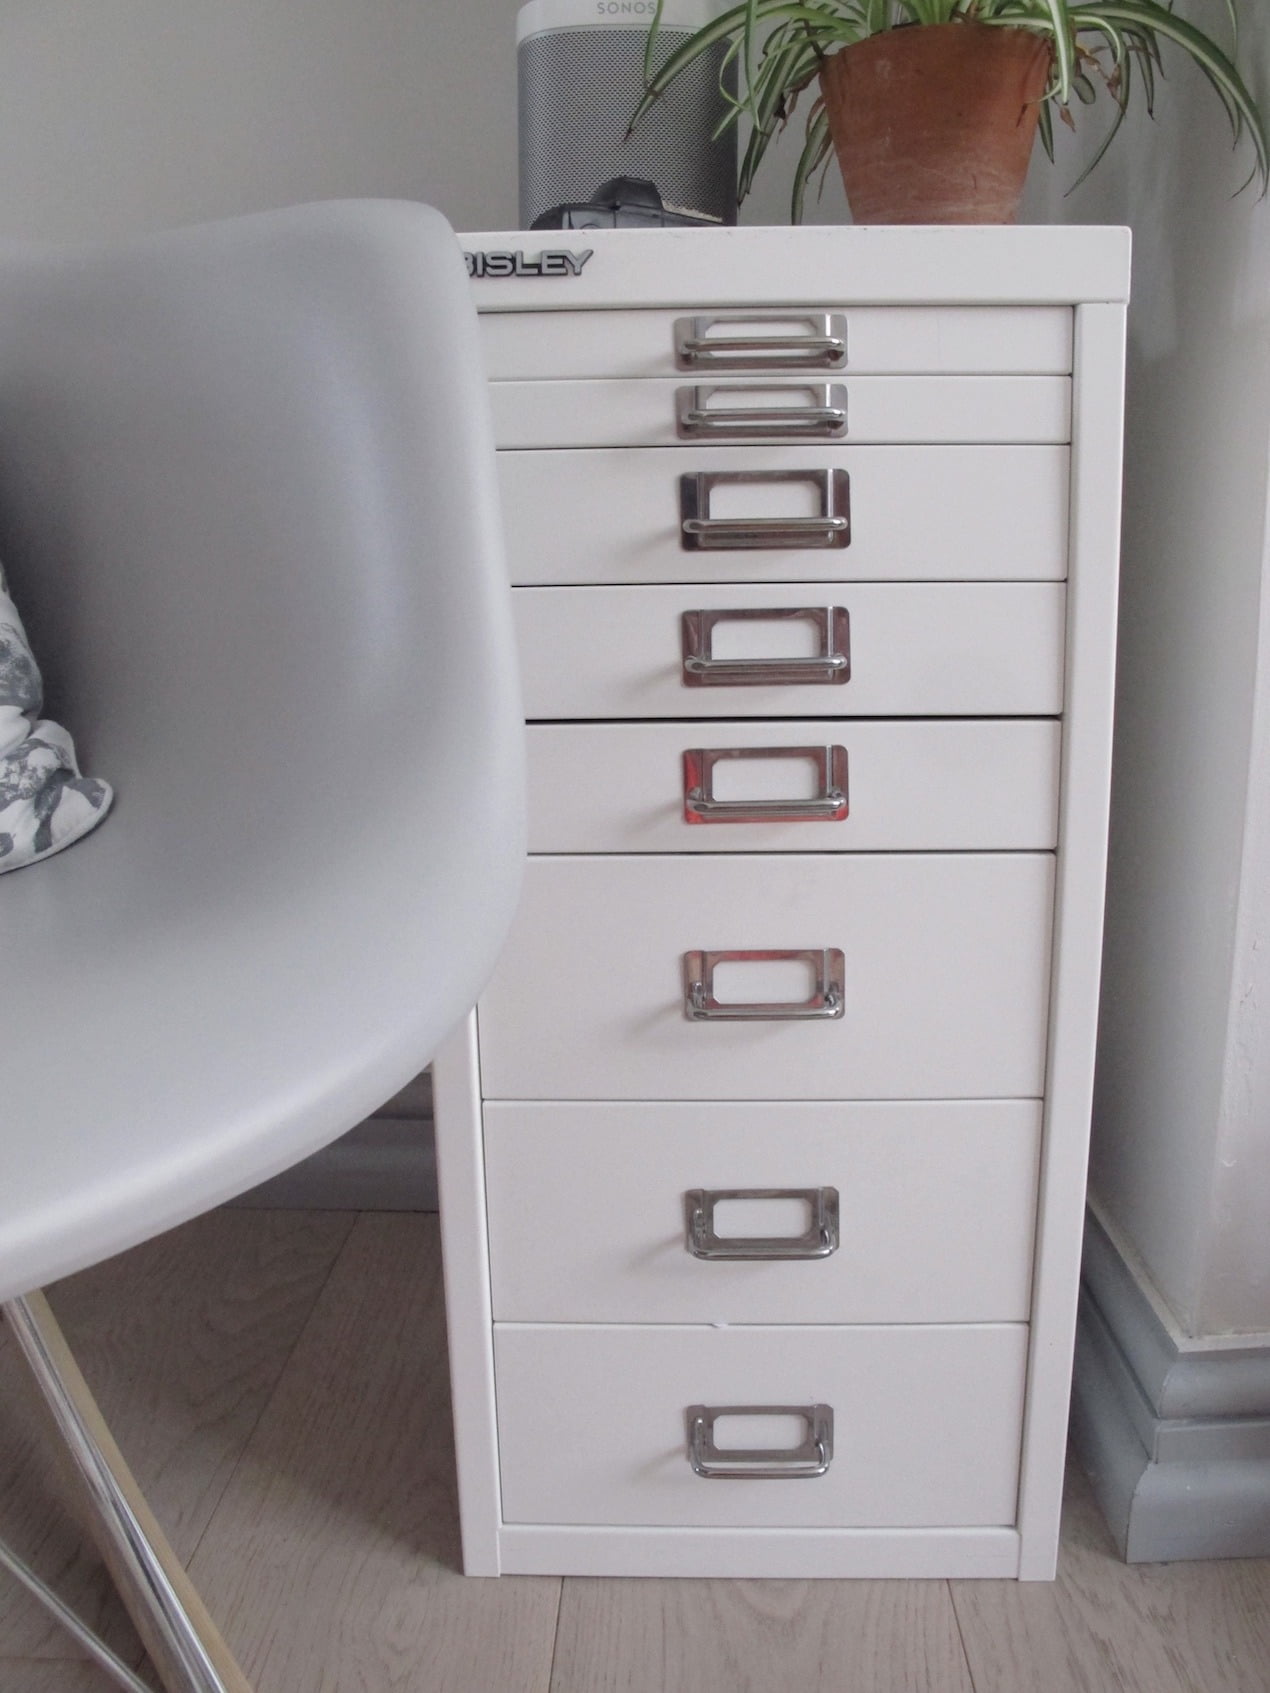 The perfect solution for your paperwork woes, and a way to stylishly organise your home with an iconic Bisley filing cabinet. www.welovehomeblog.com